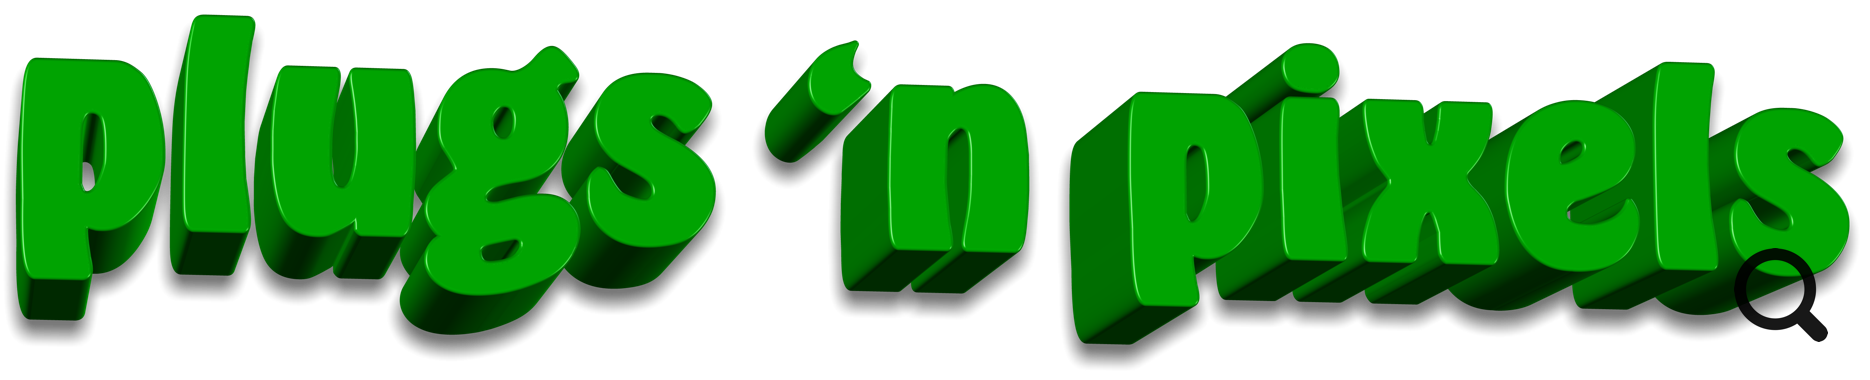 3D text example